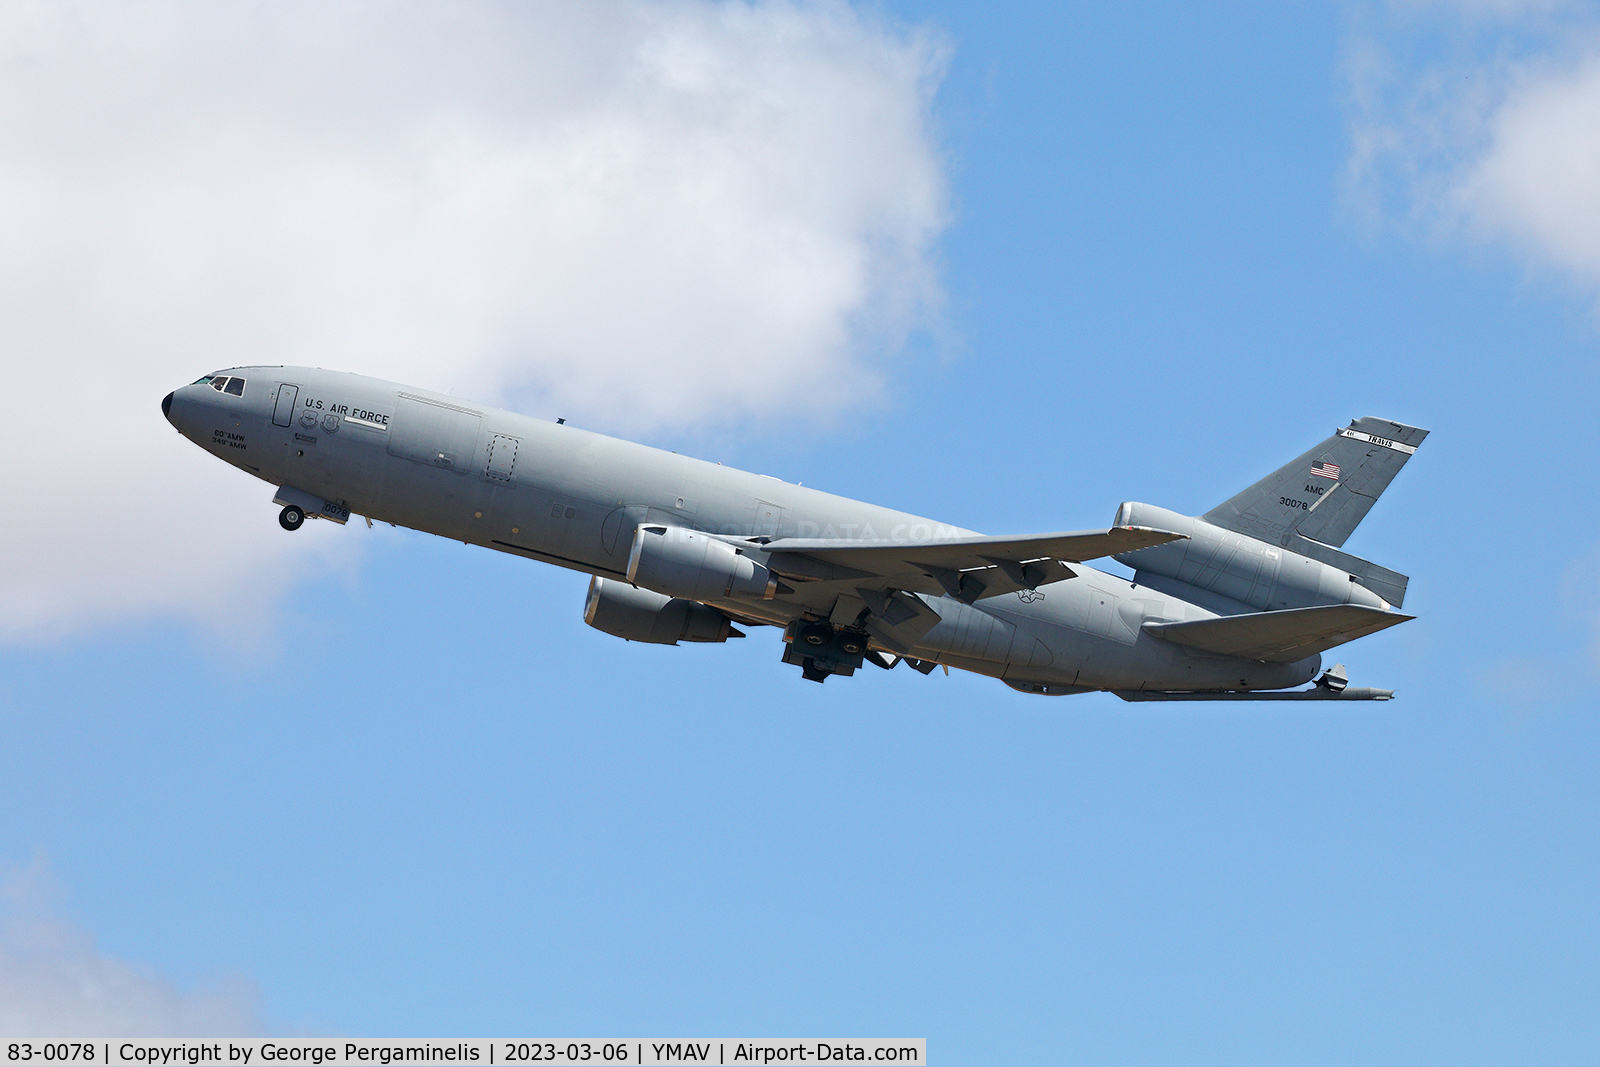 83-0078, 1983 McDonnell Douglas KC-10A Extender C/N 48219, Departing for home after the airshow.